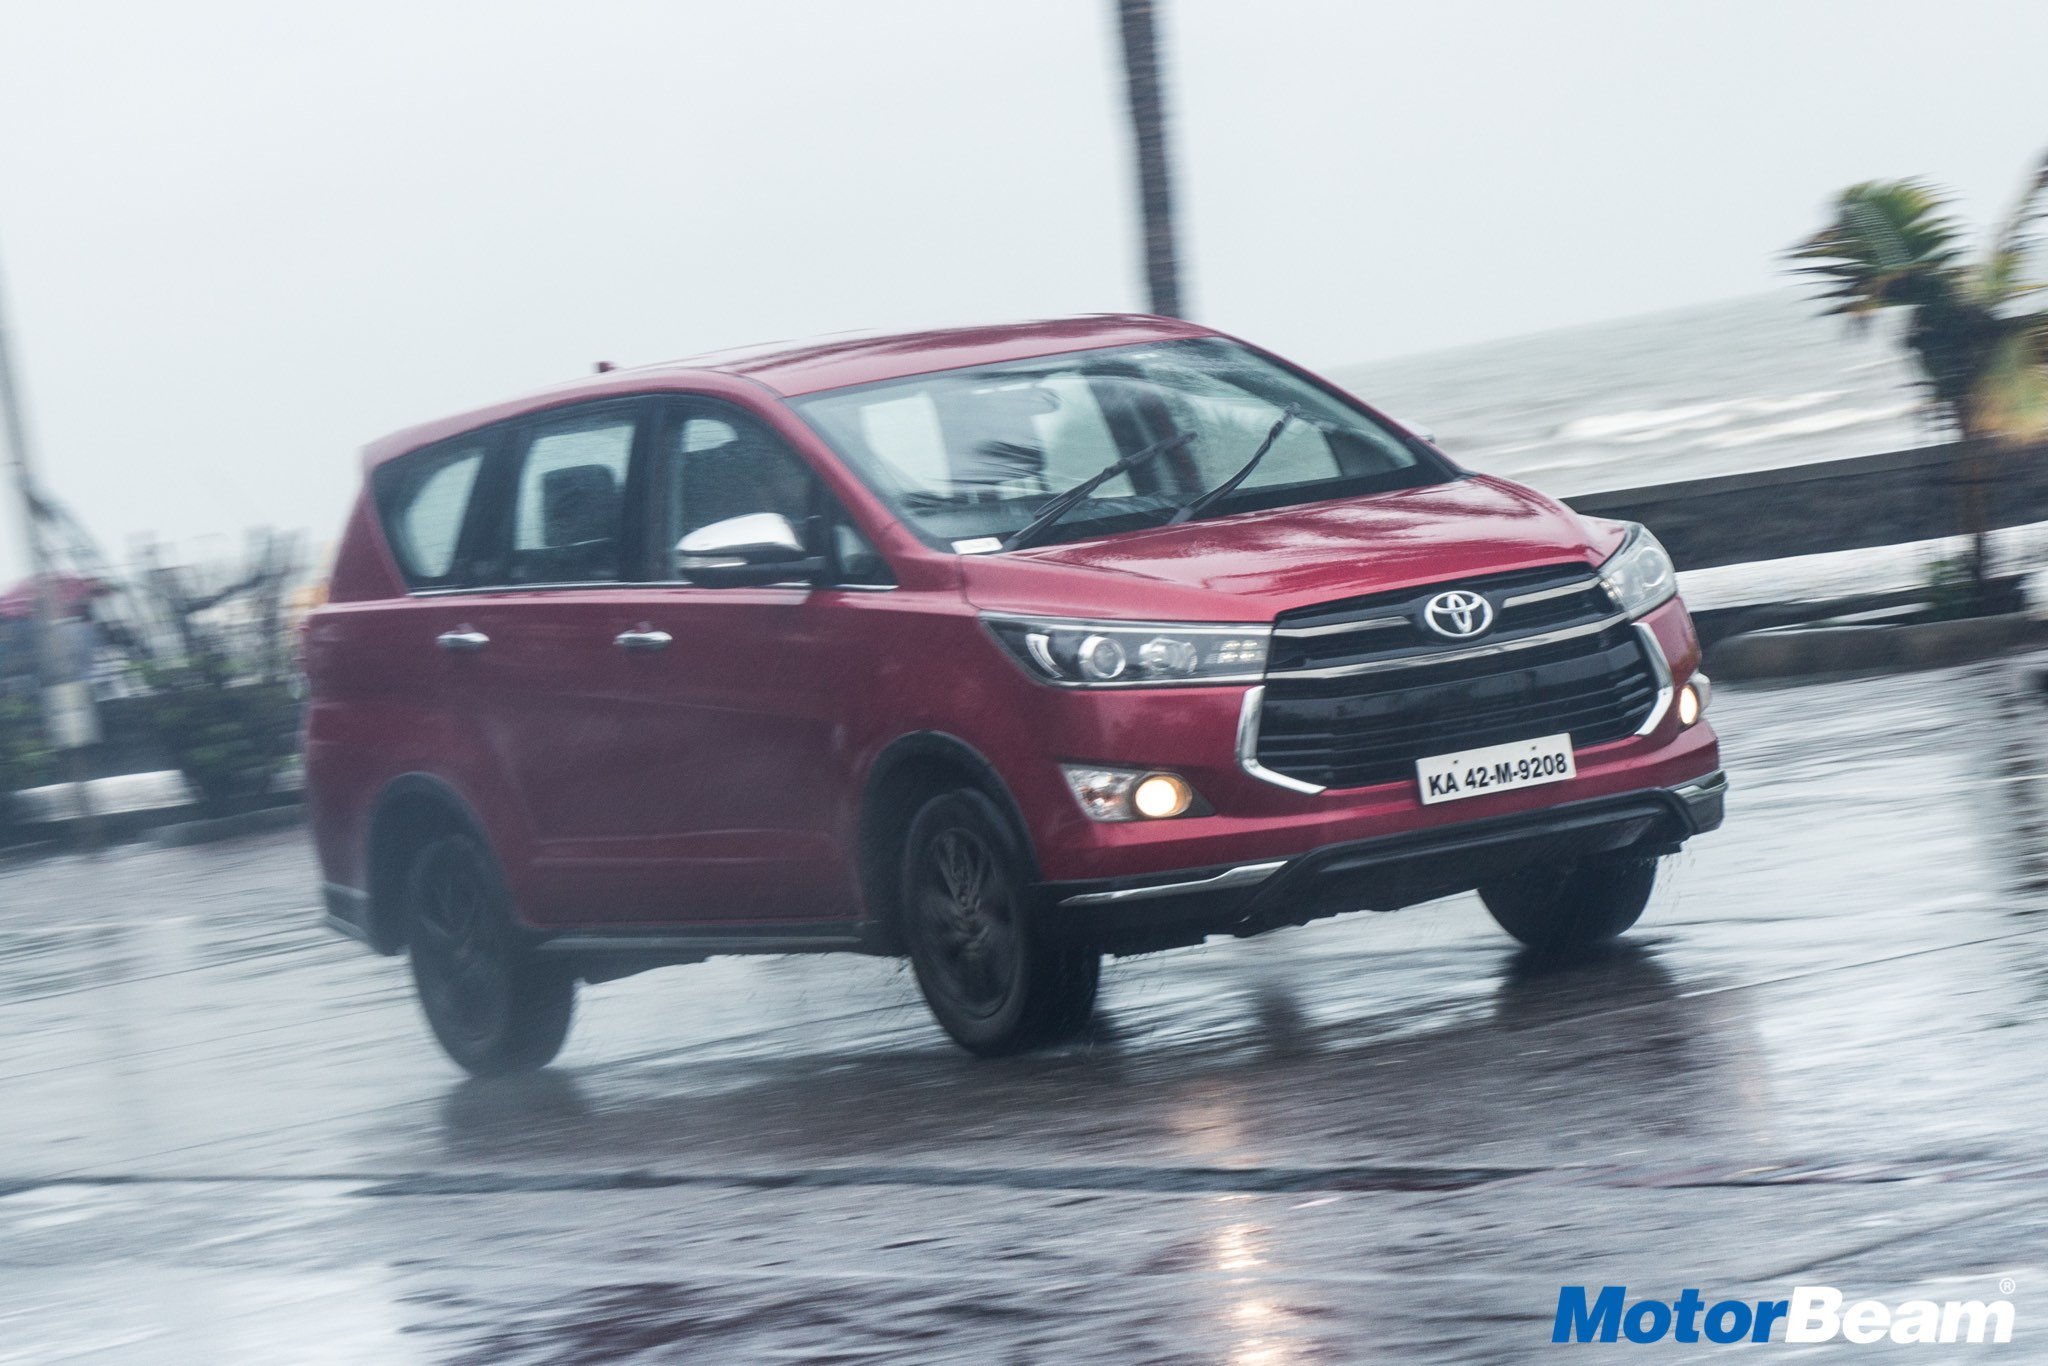 Toyota Innova Crysta Bs6 Price Hiked By Rs 25 000 61 000